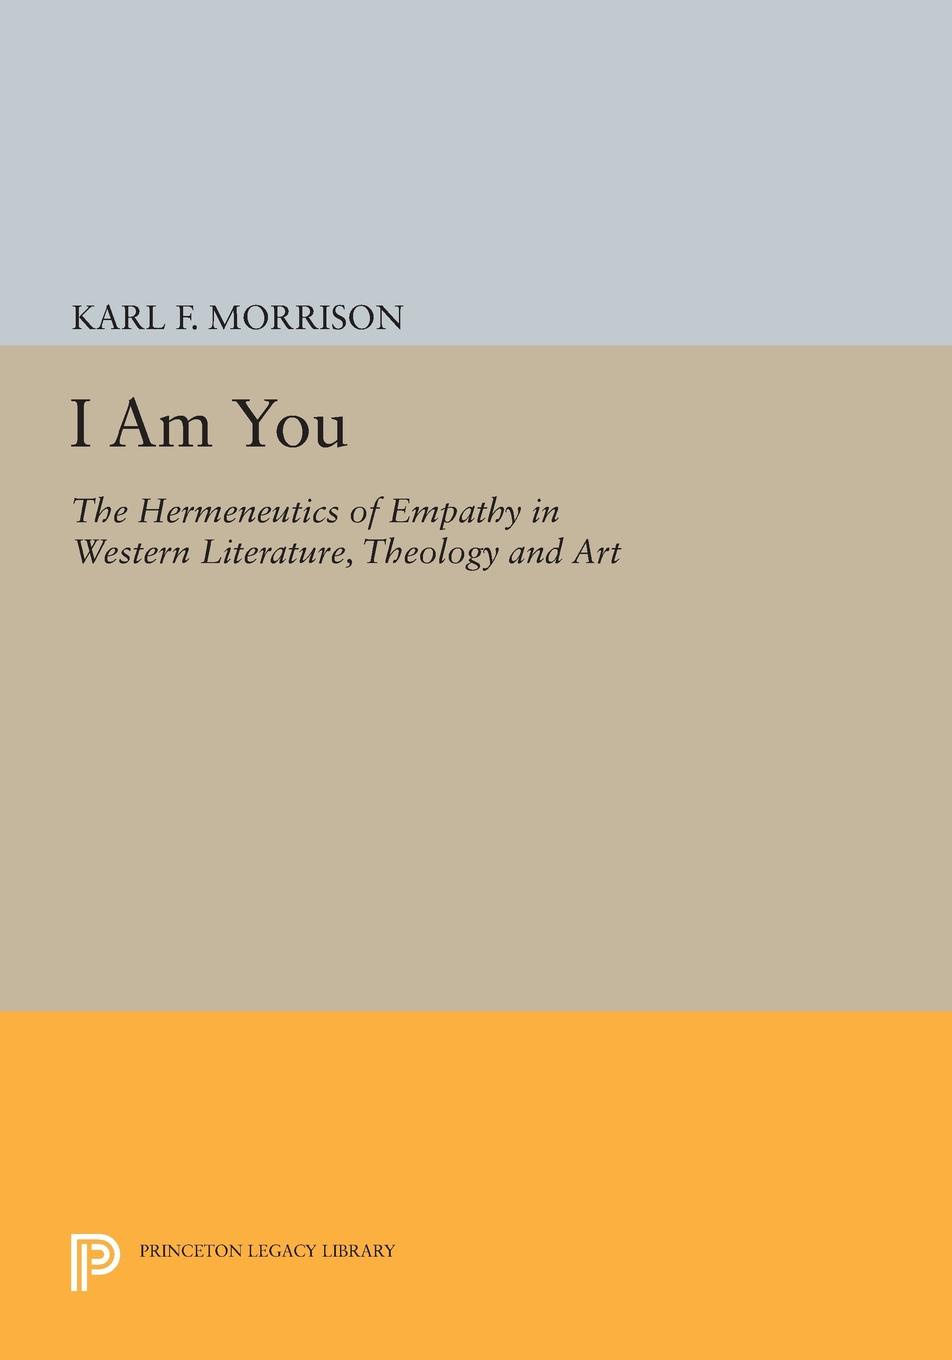 I Am You. The Hermeneutics of Empathy in Western Literature, Theology and Art